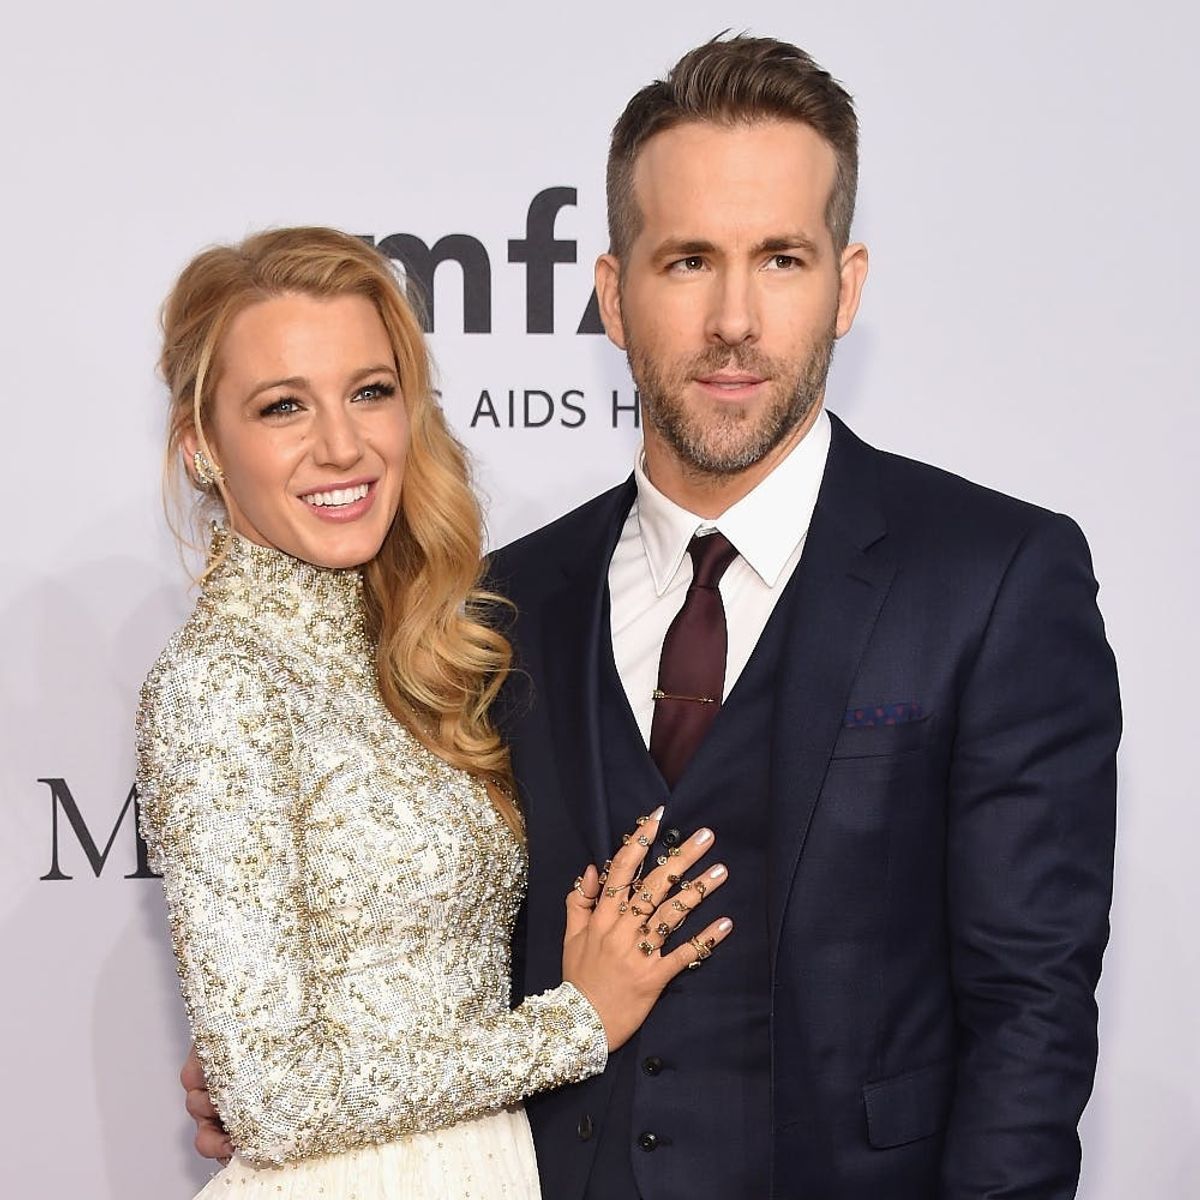 Blake Lively Reveals Why She Married Ryan Reynolds